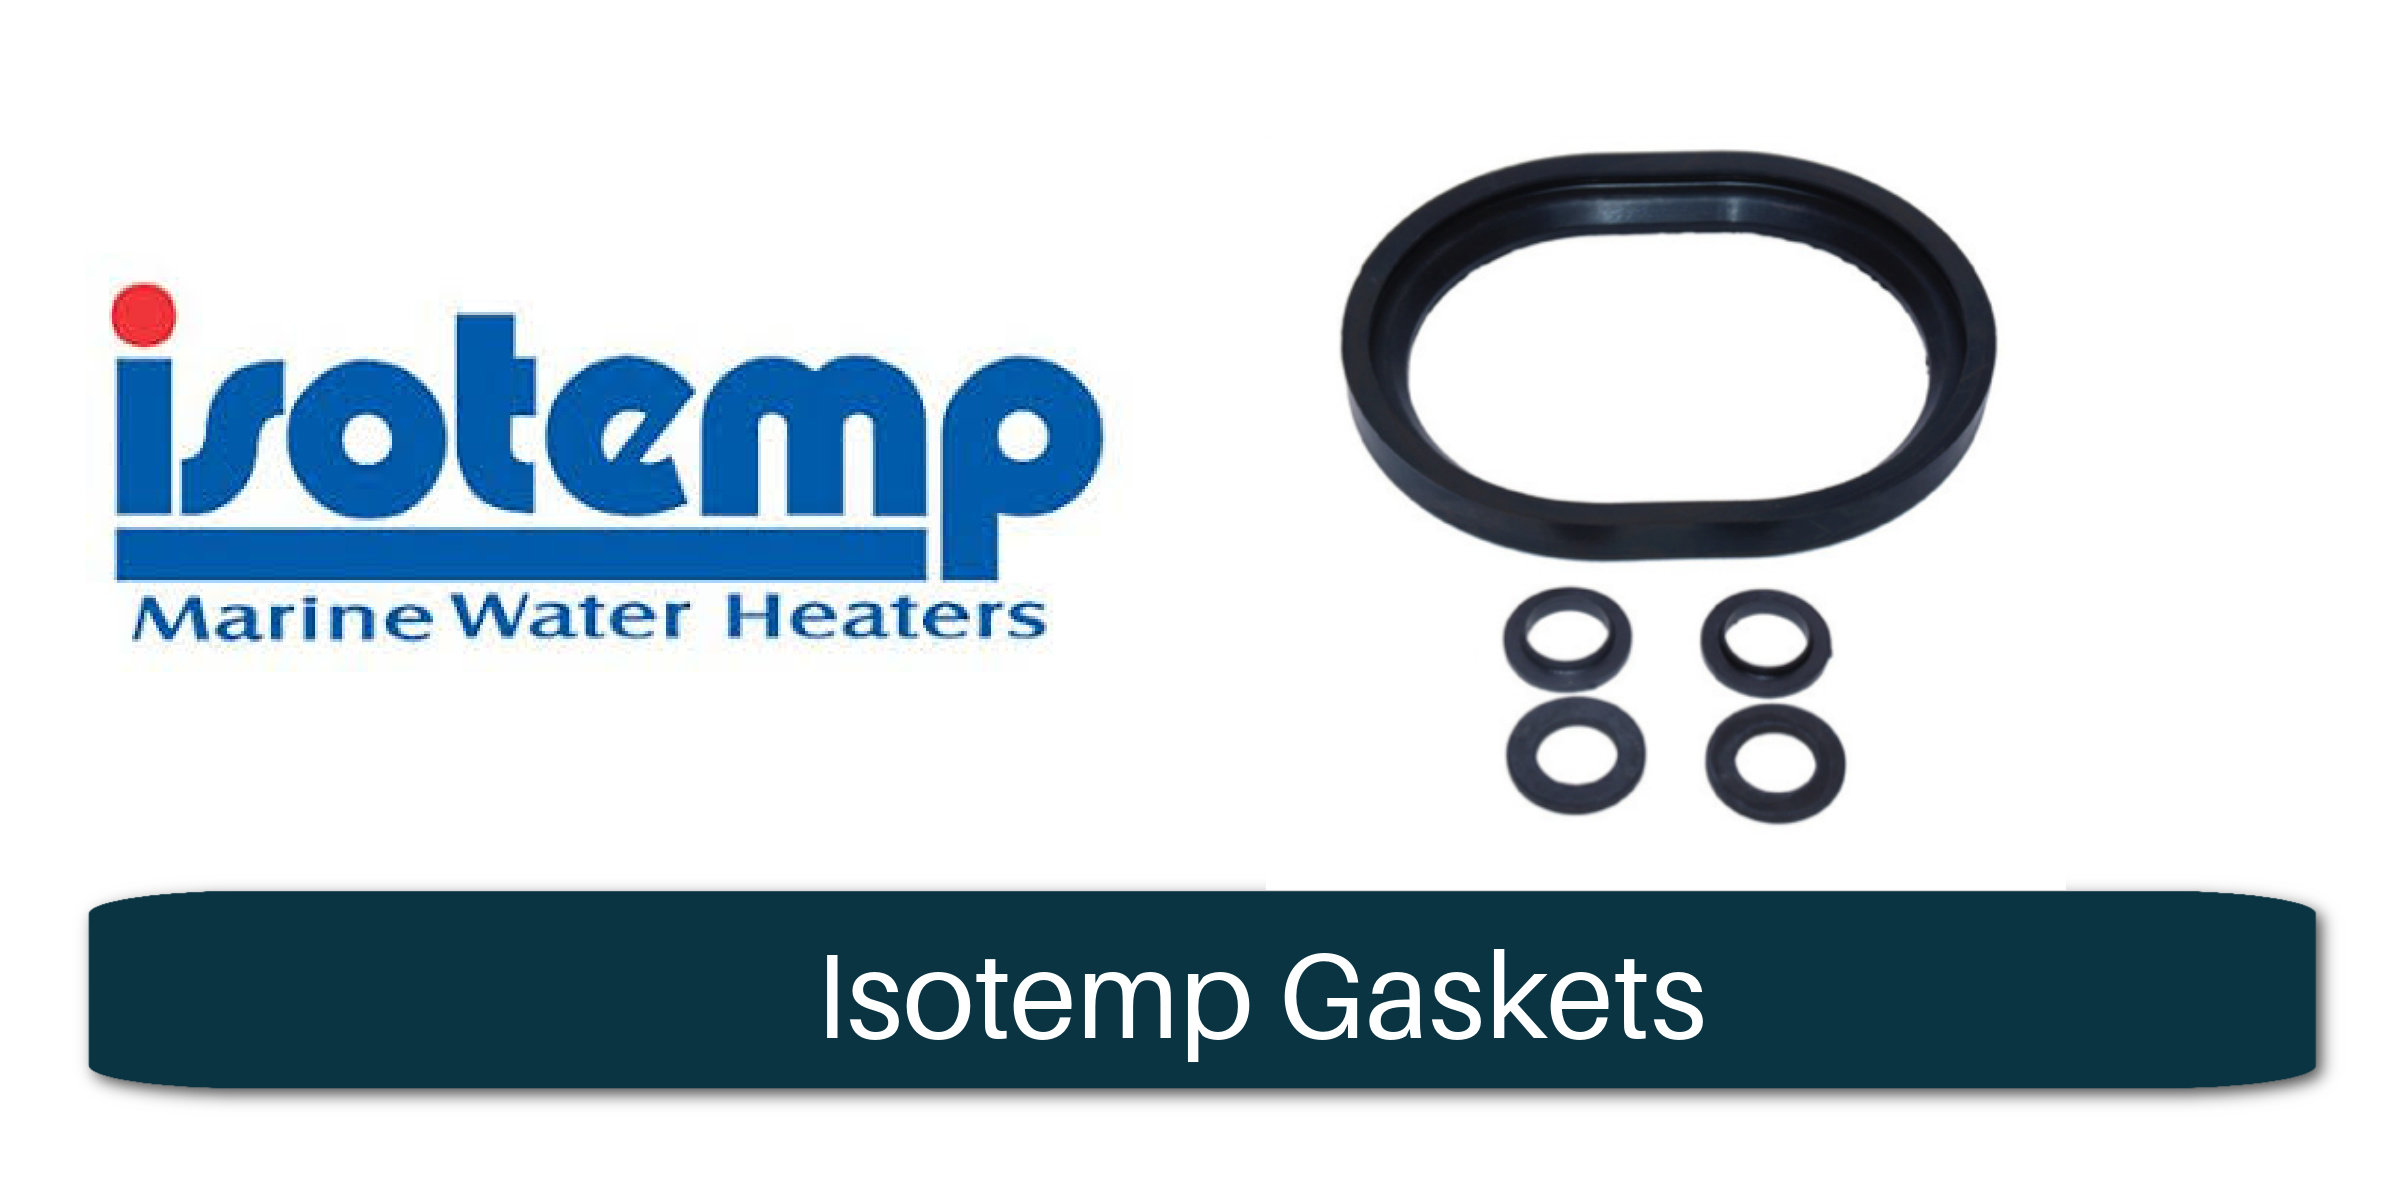 Isotemp Gaskets